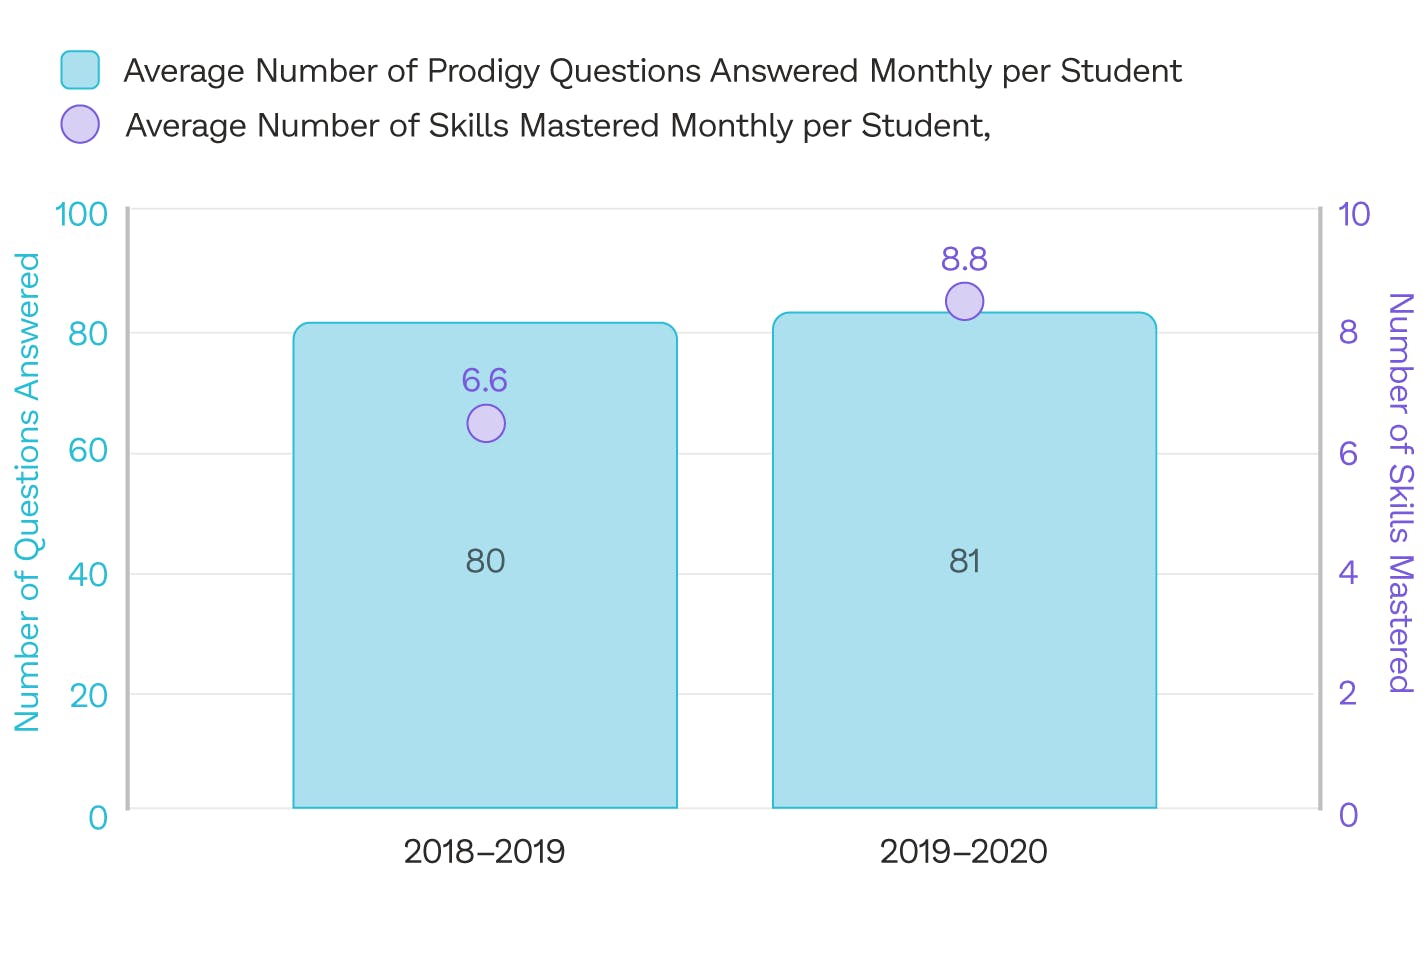 On average, students from Beulah Elementary School mastered more skills per month in 2019-20 compared to 2018-19 with the help of dedicated Prodigy usage.